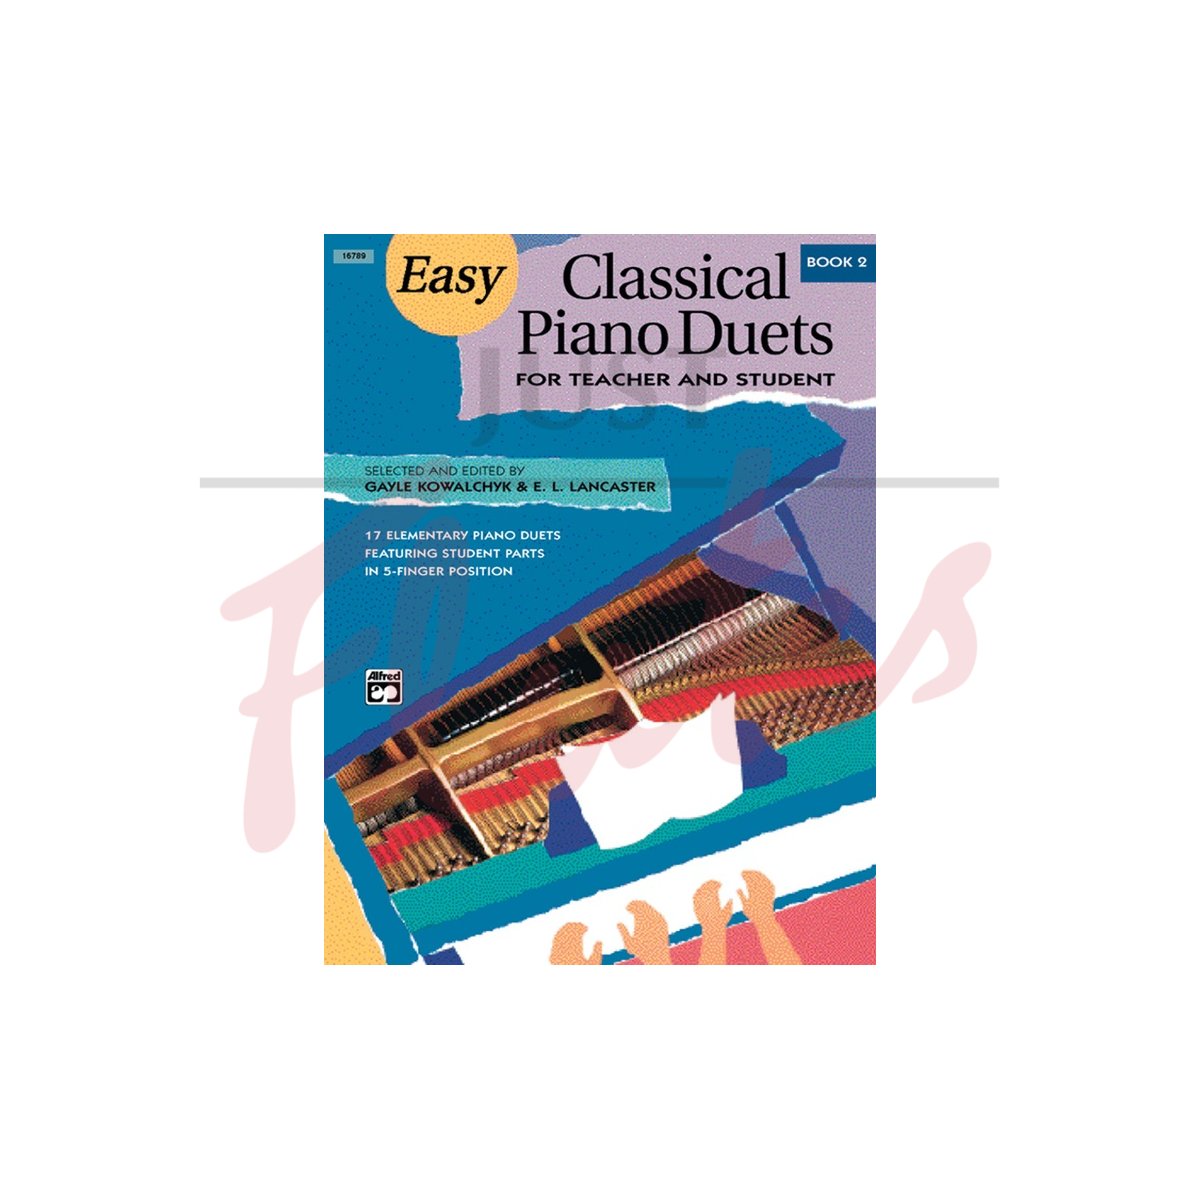 Easy Classical Piano Duets for Teacher and Student, Book 2